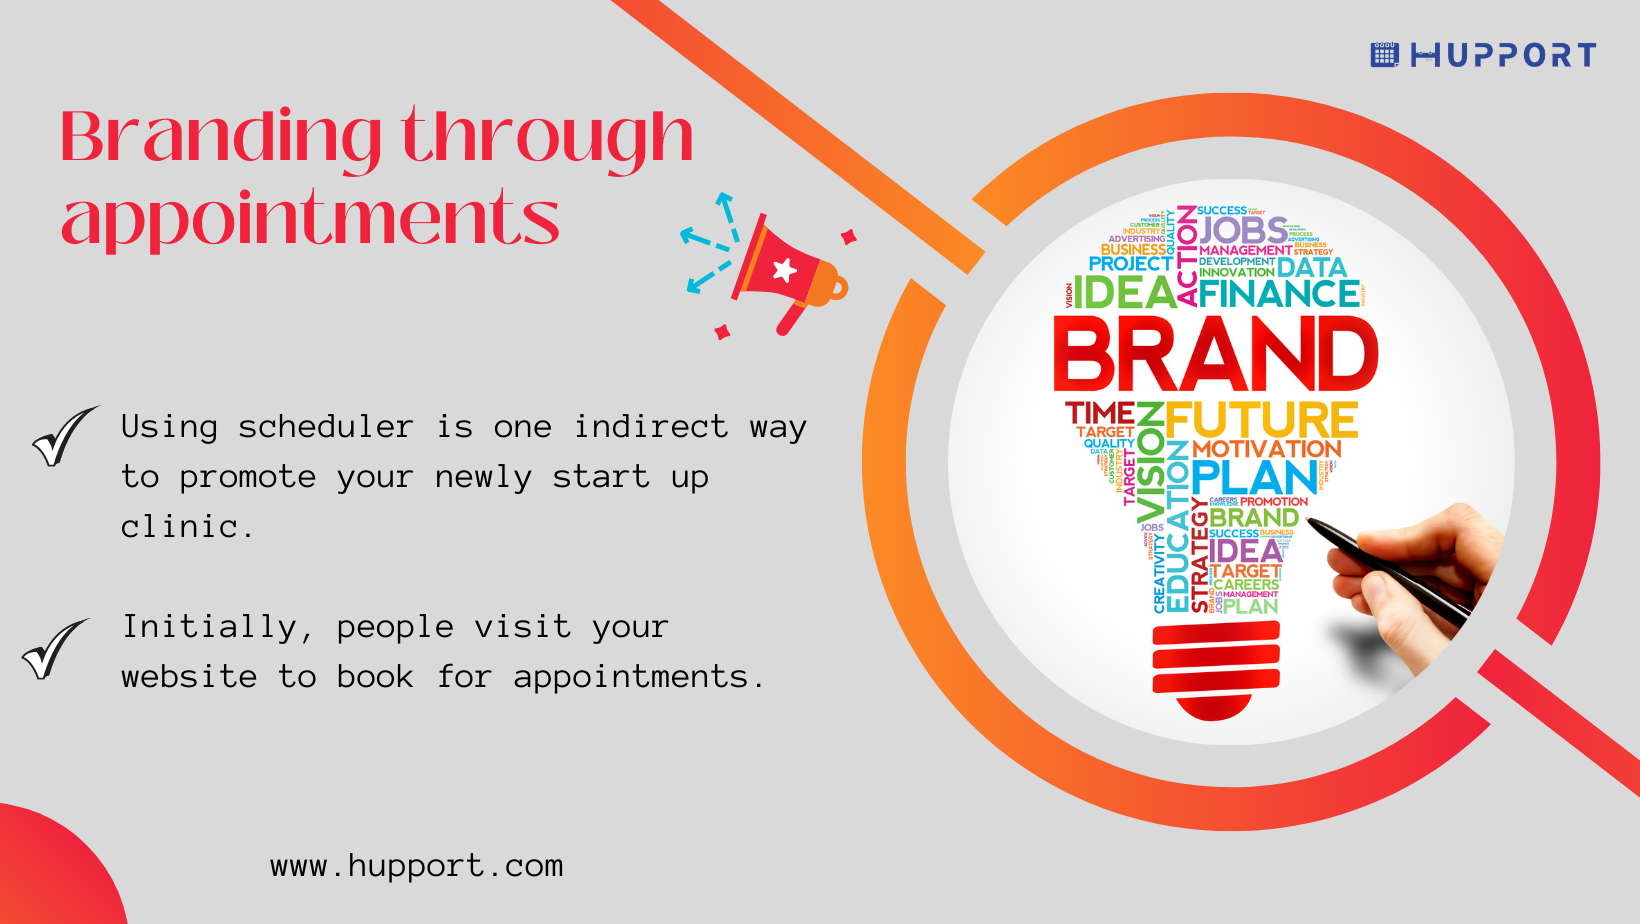 Branding through appointments